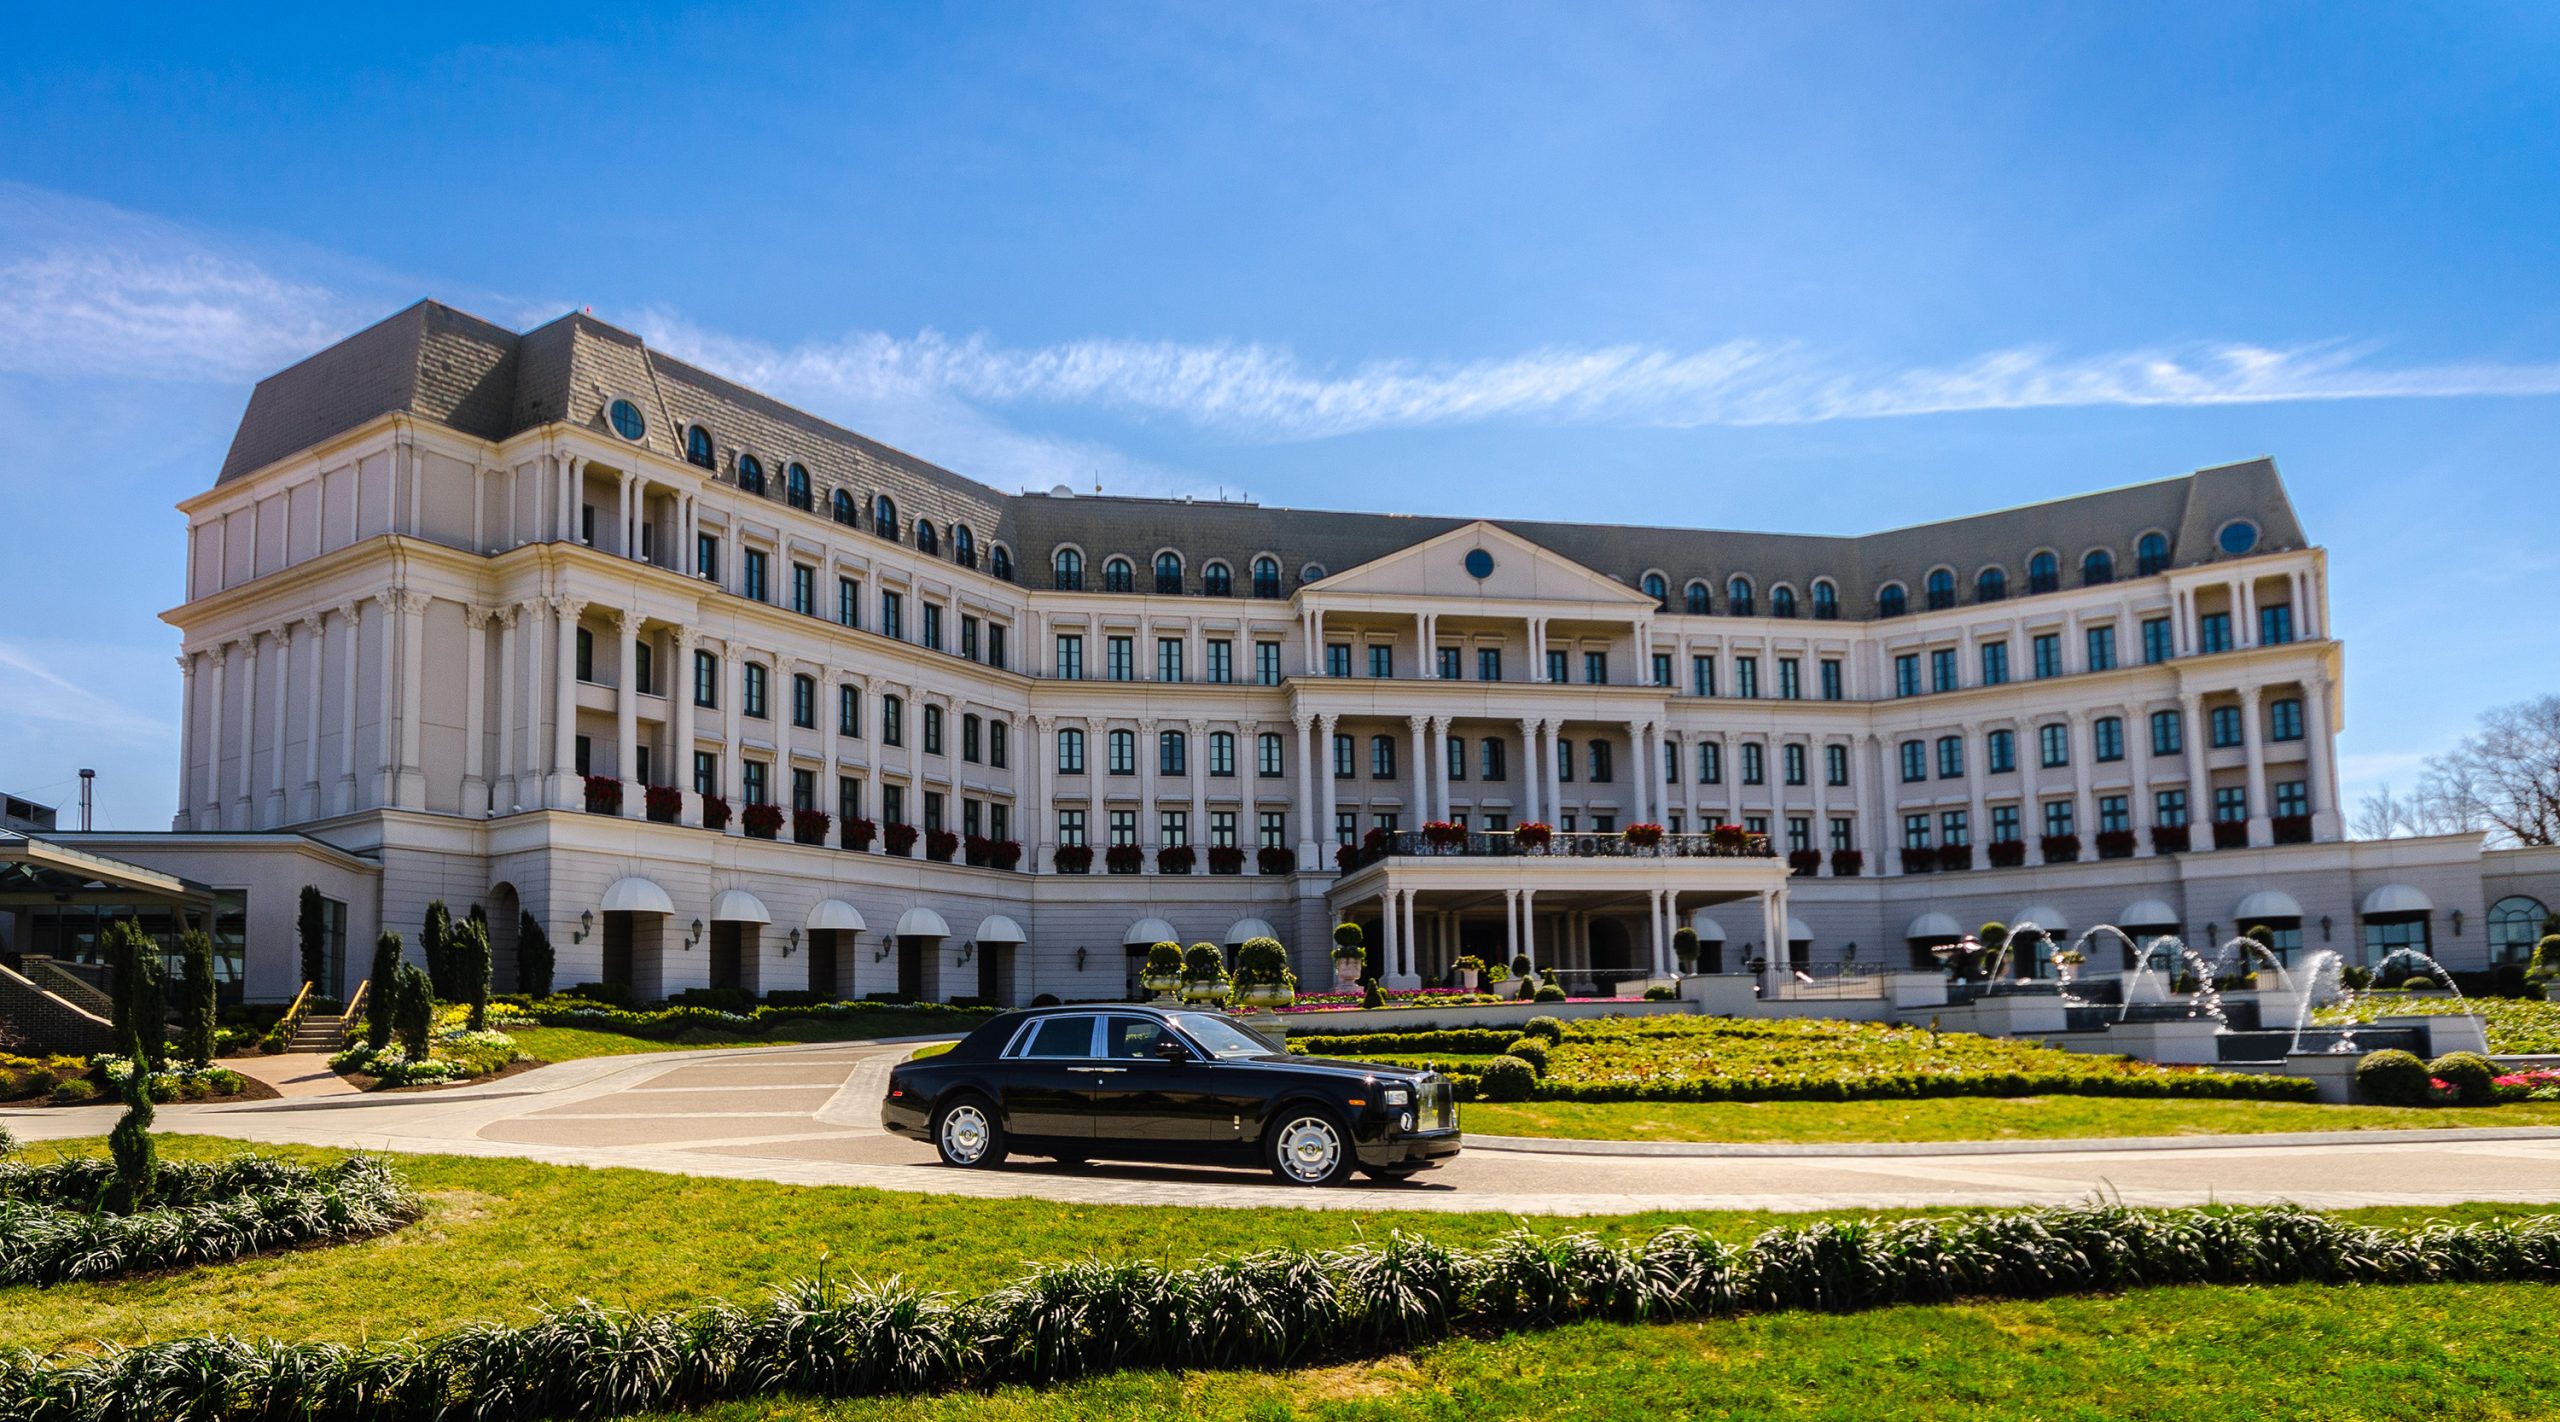 A Rolls Royce drives in front of The Chateau at Nemacolin